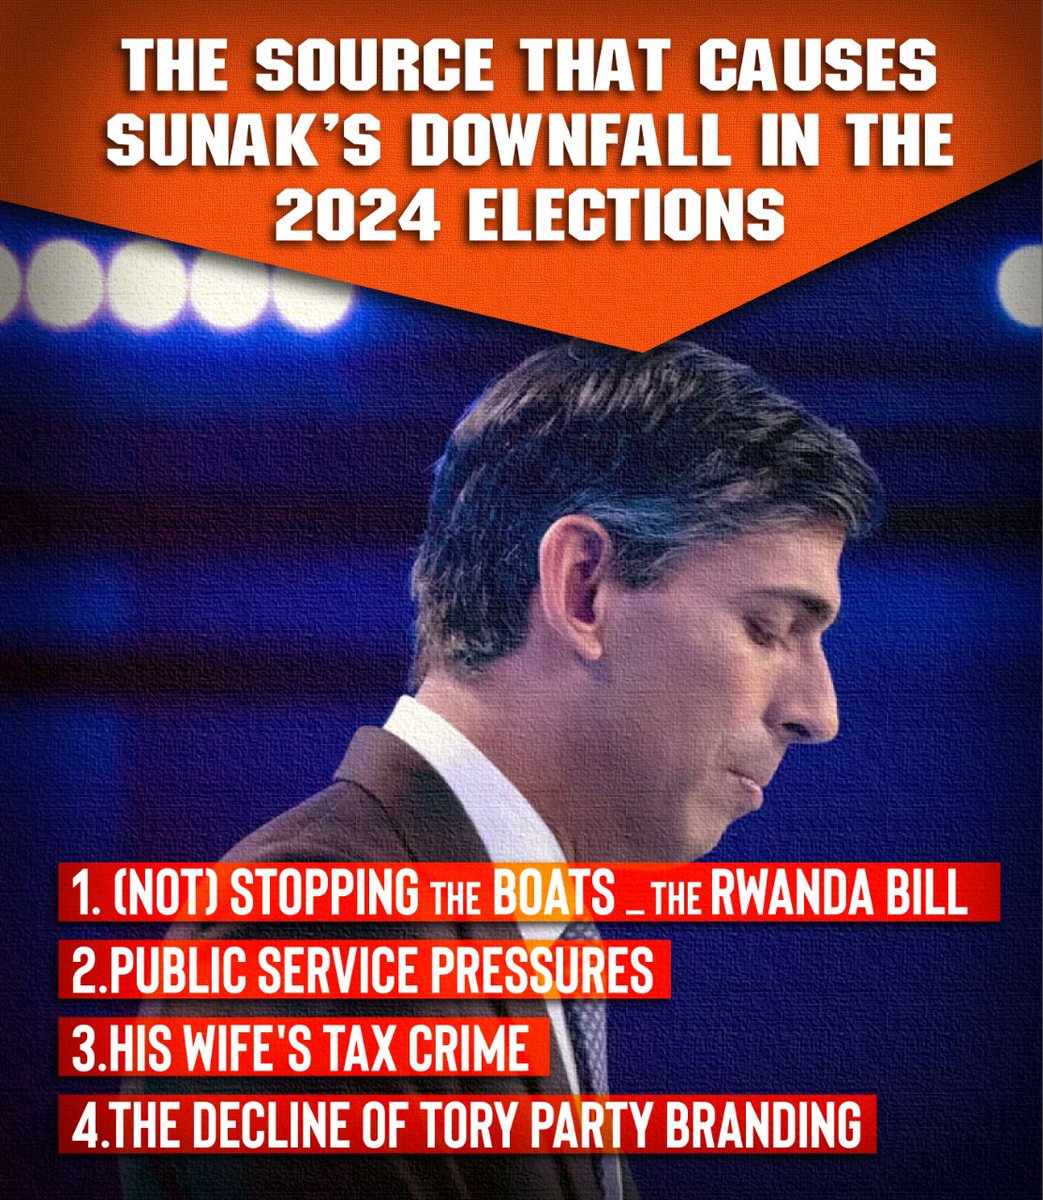 The reasons for the fire and defeat of Sunak in the 2024 elections

Sending immigrants to Rwanda

Reducing the level of public services

Sunak's wife tax evasion

The decline of Tory party branding
 #ToriesOut551